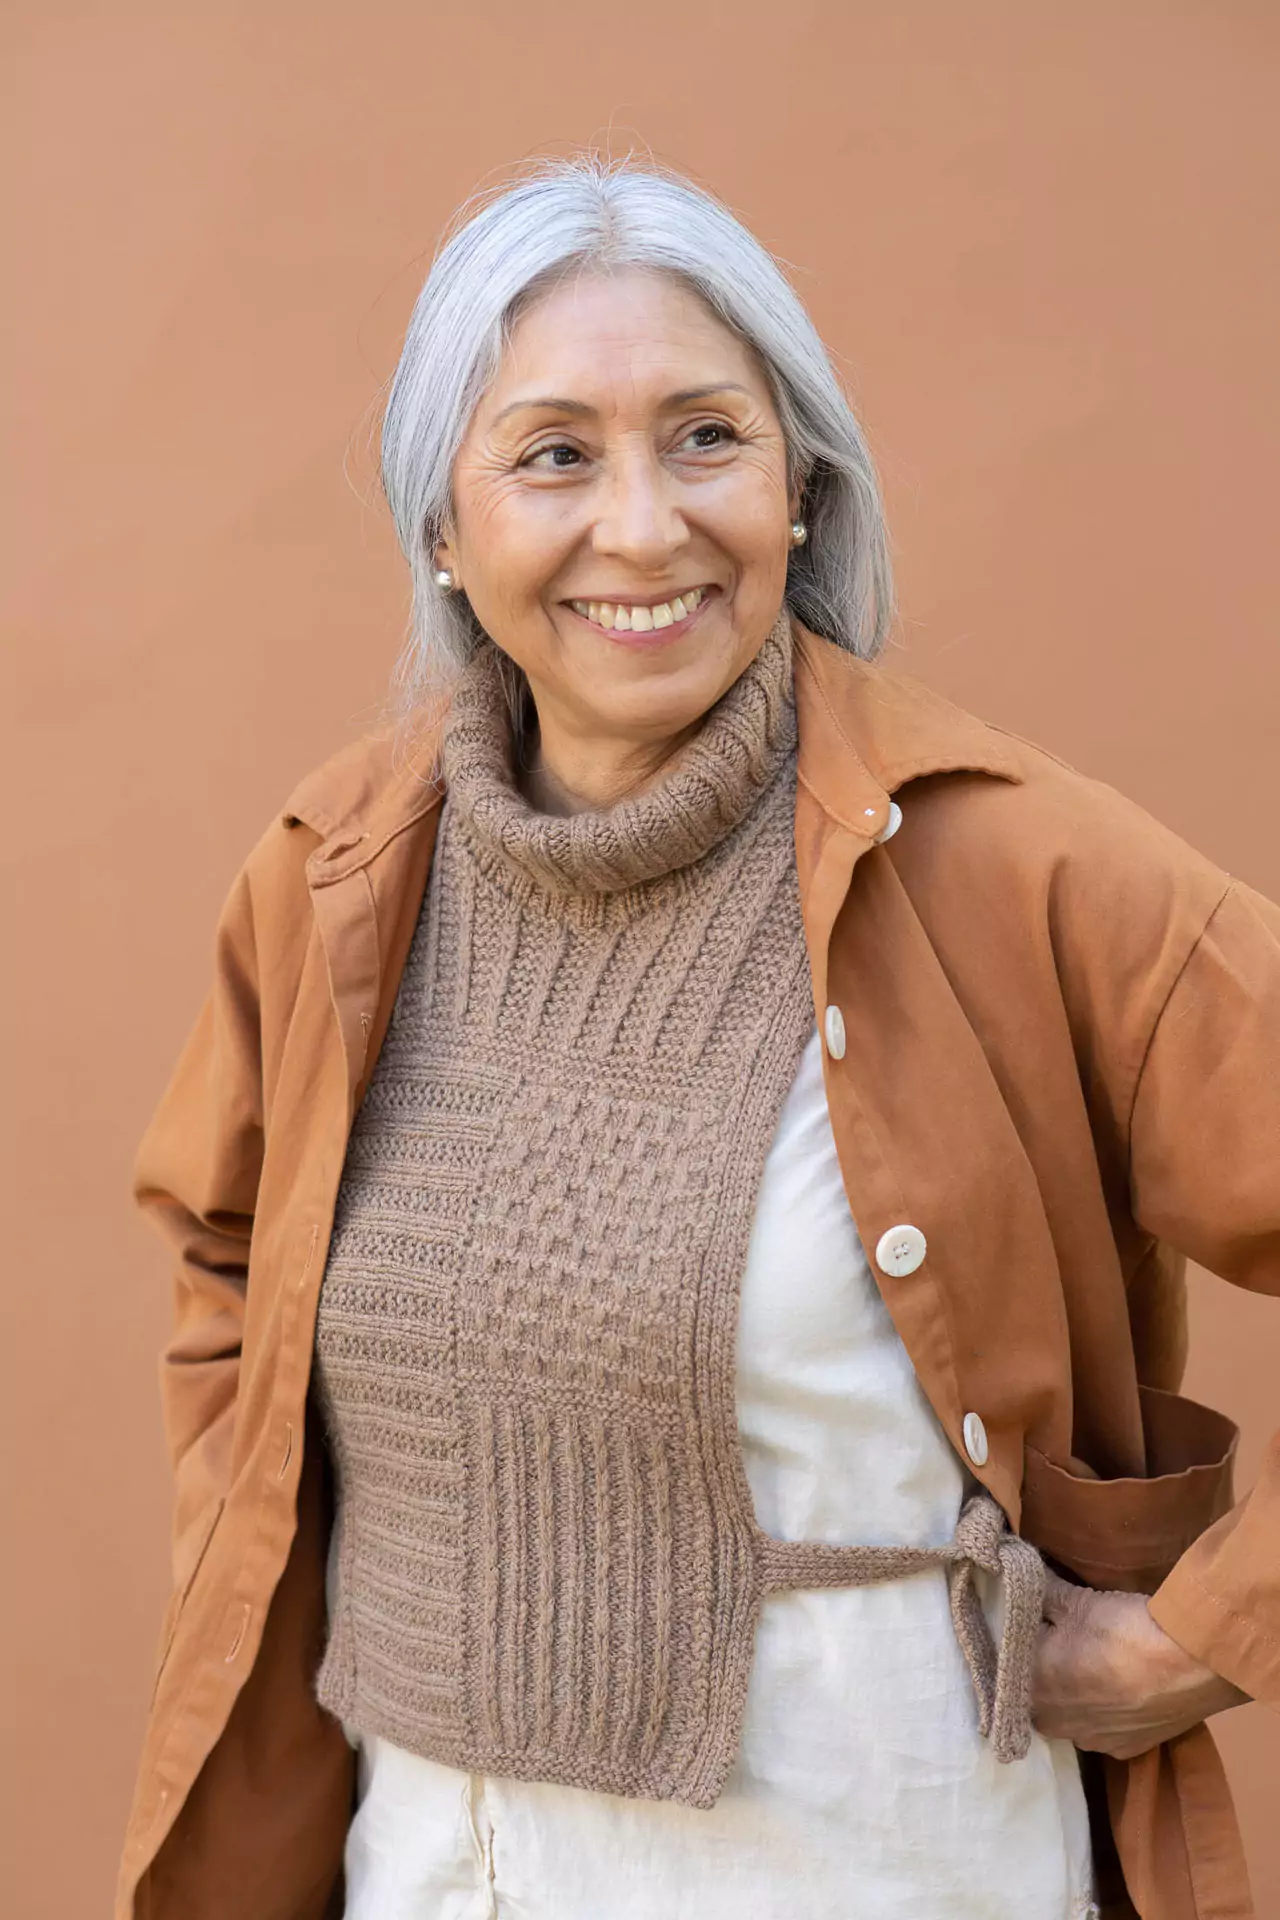 A mature silver-haired woman wearing a textured hand knitted dickey beneath a jacket